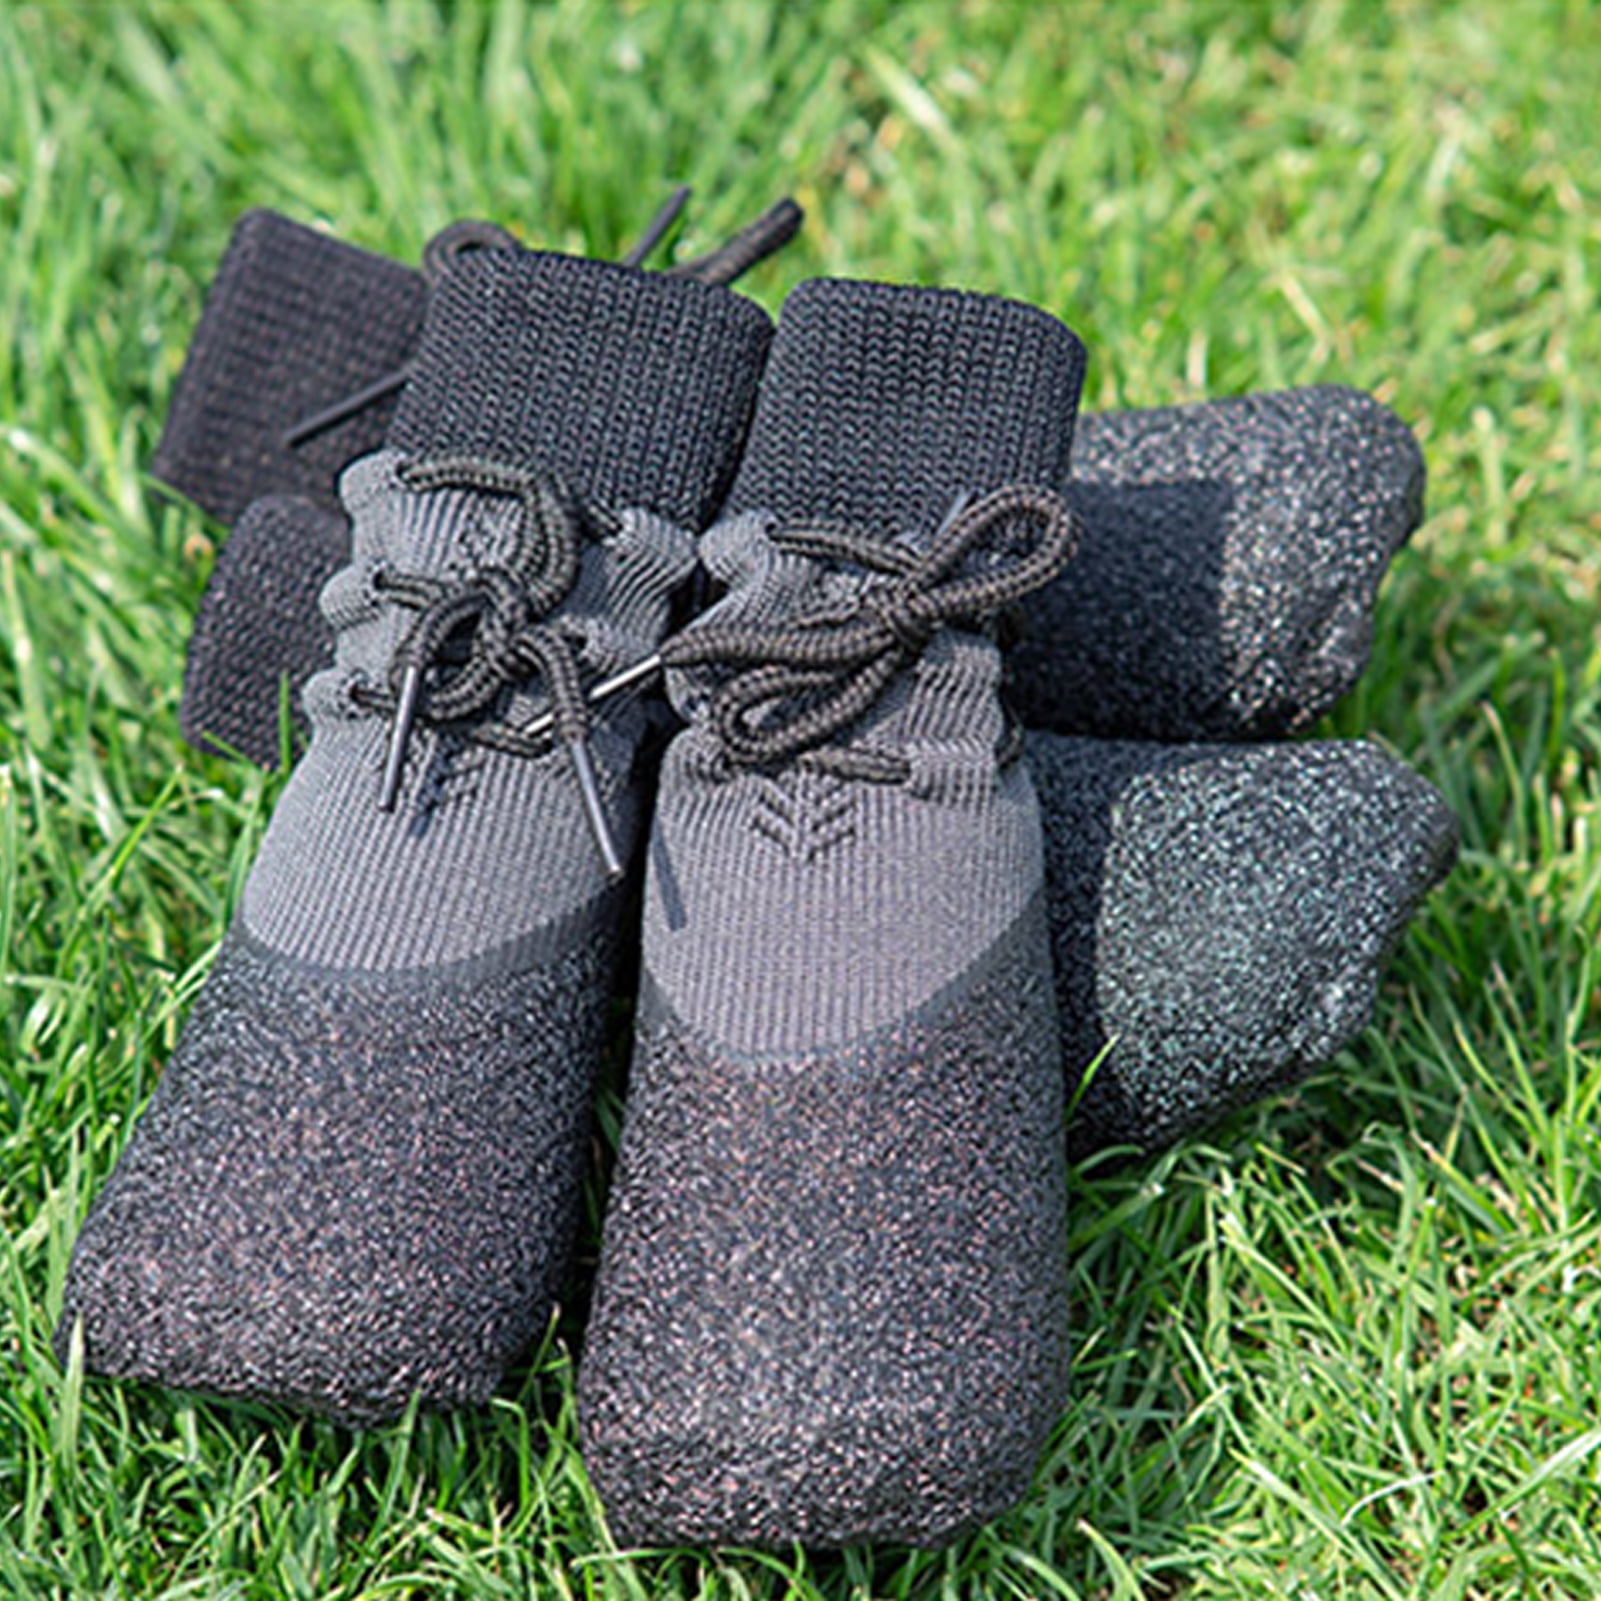 Outdoor Dog Boots Shock Absorption, Dog Slippers For Hardwood Floors